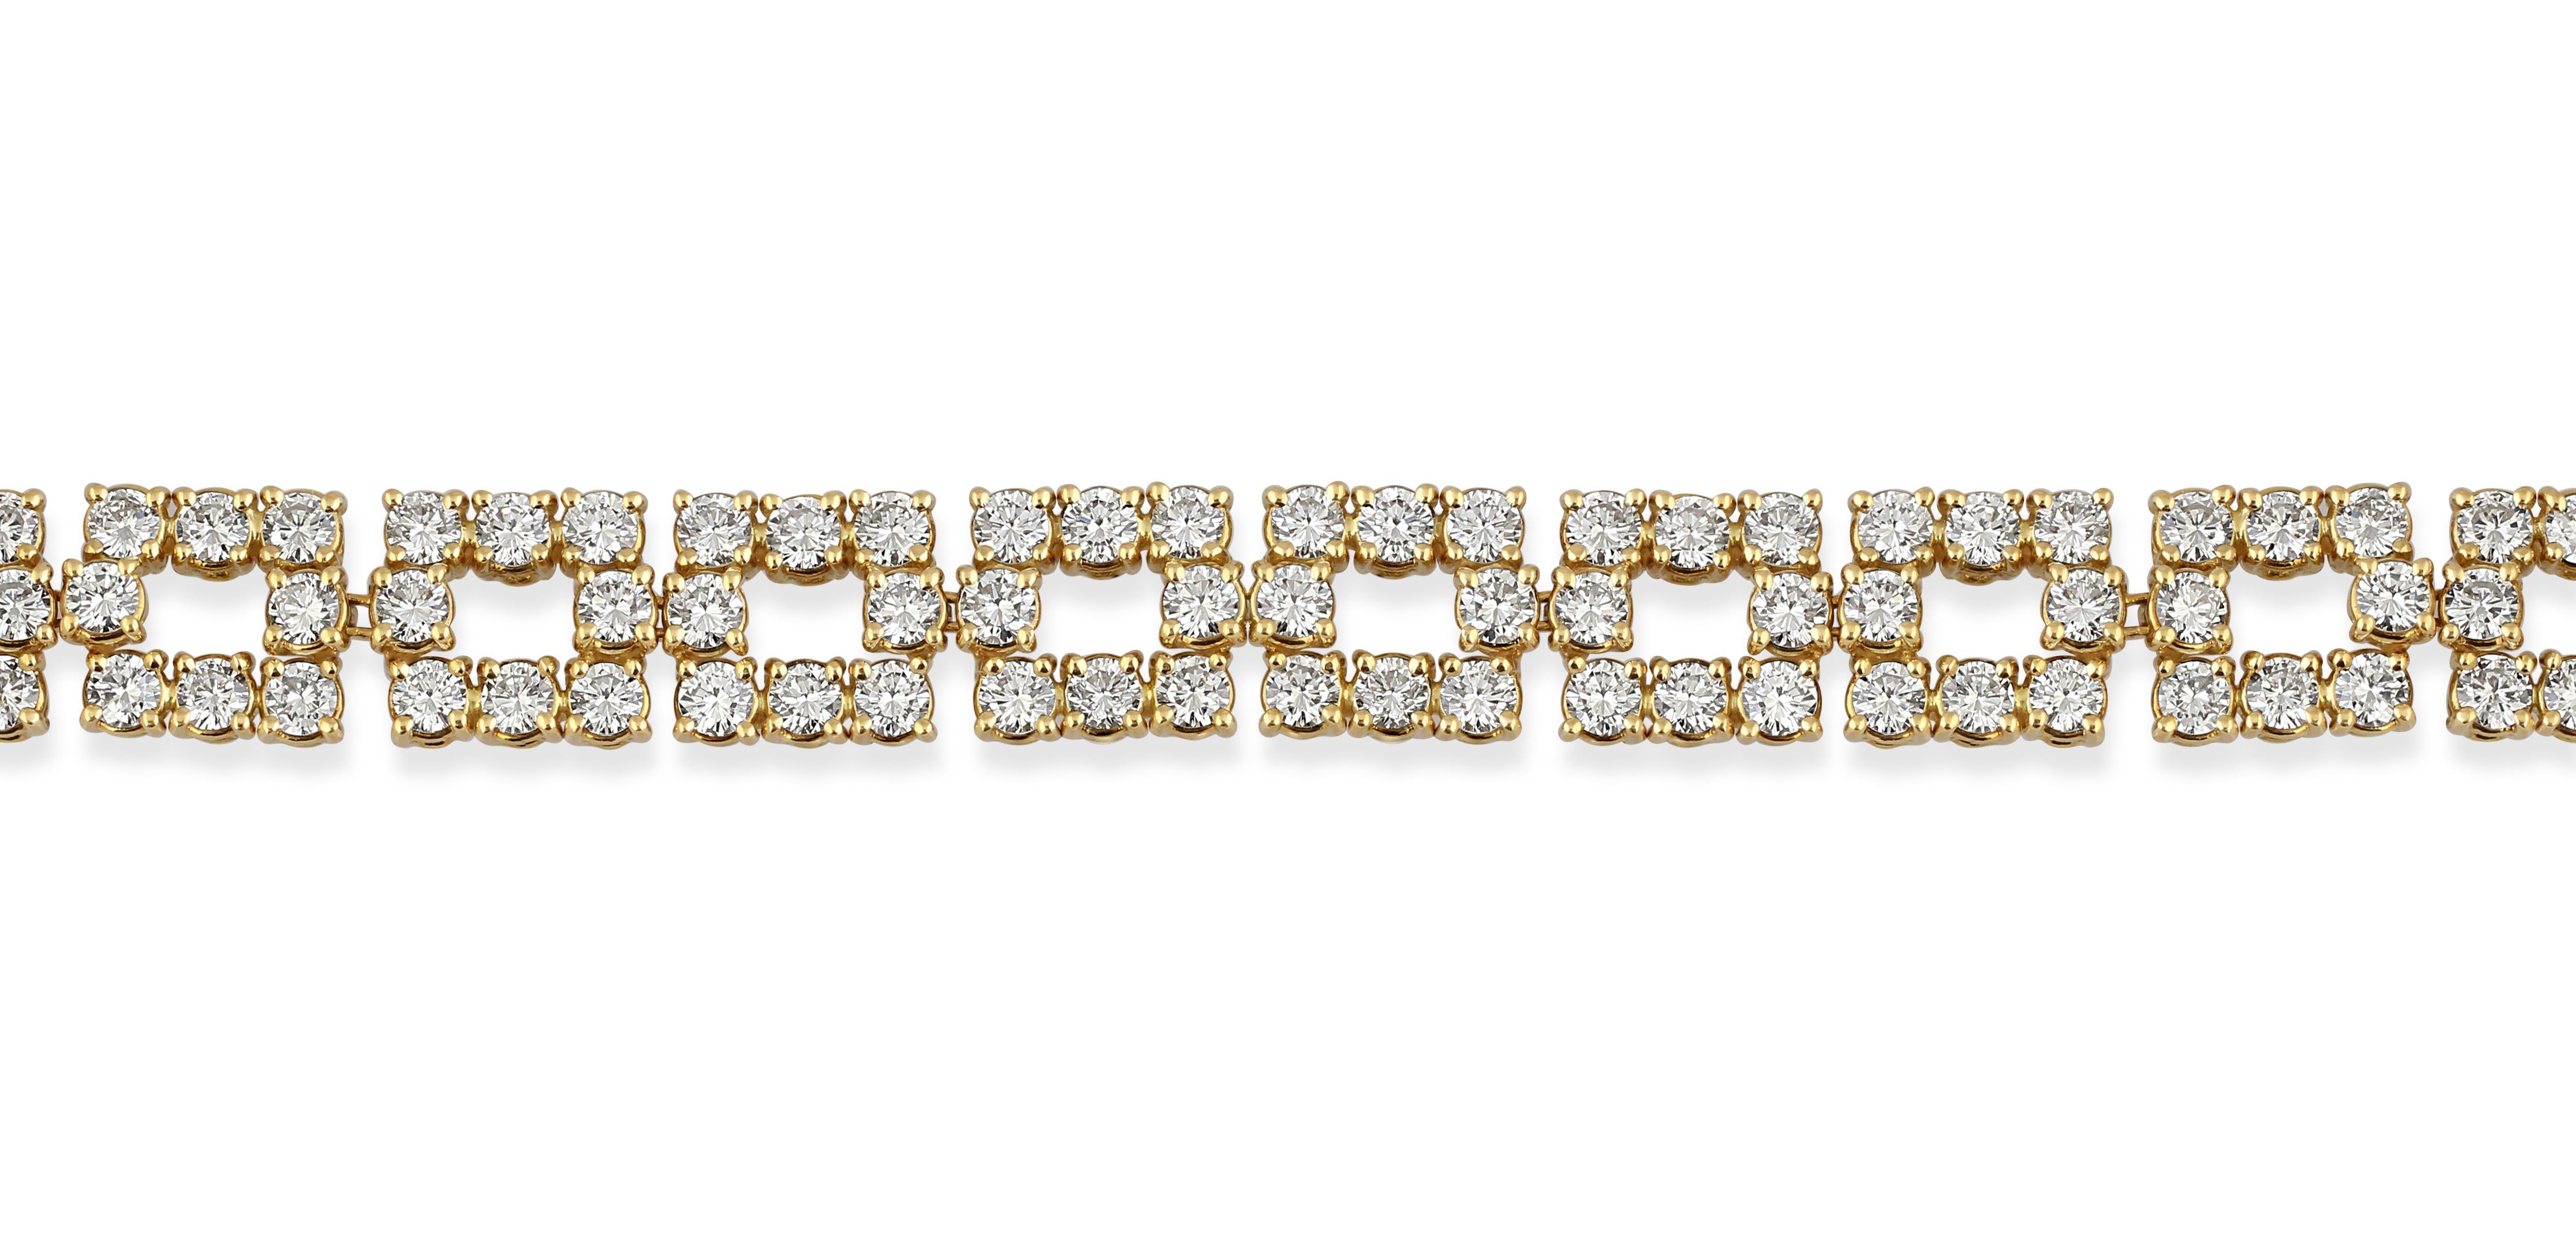 An 18k gold and diamond necklace set with 20.00cts of brilliant cut diamonds.

Length: 40.5cm
Weight: 56gr
